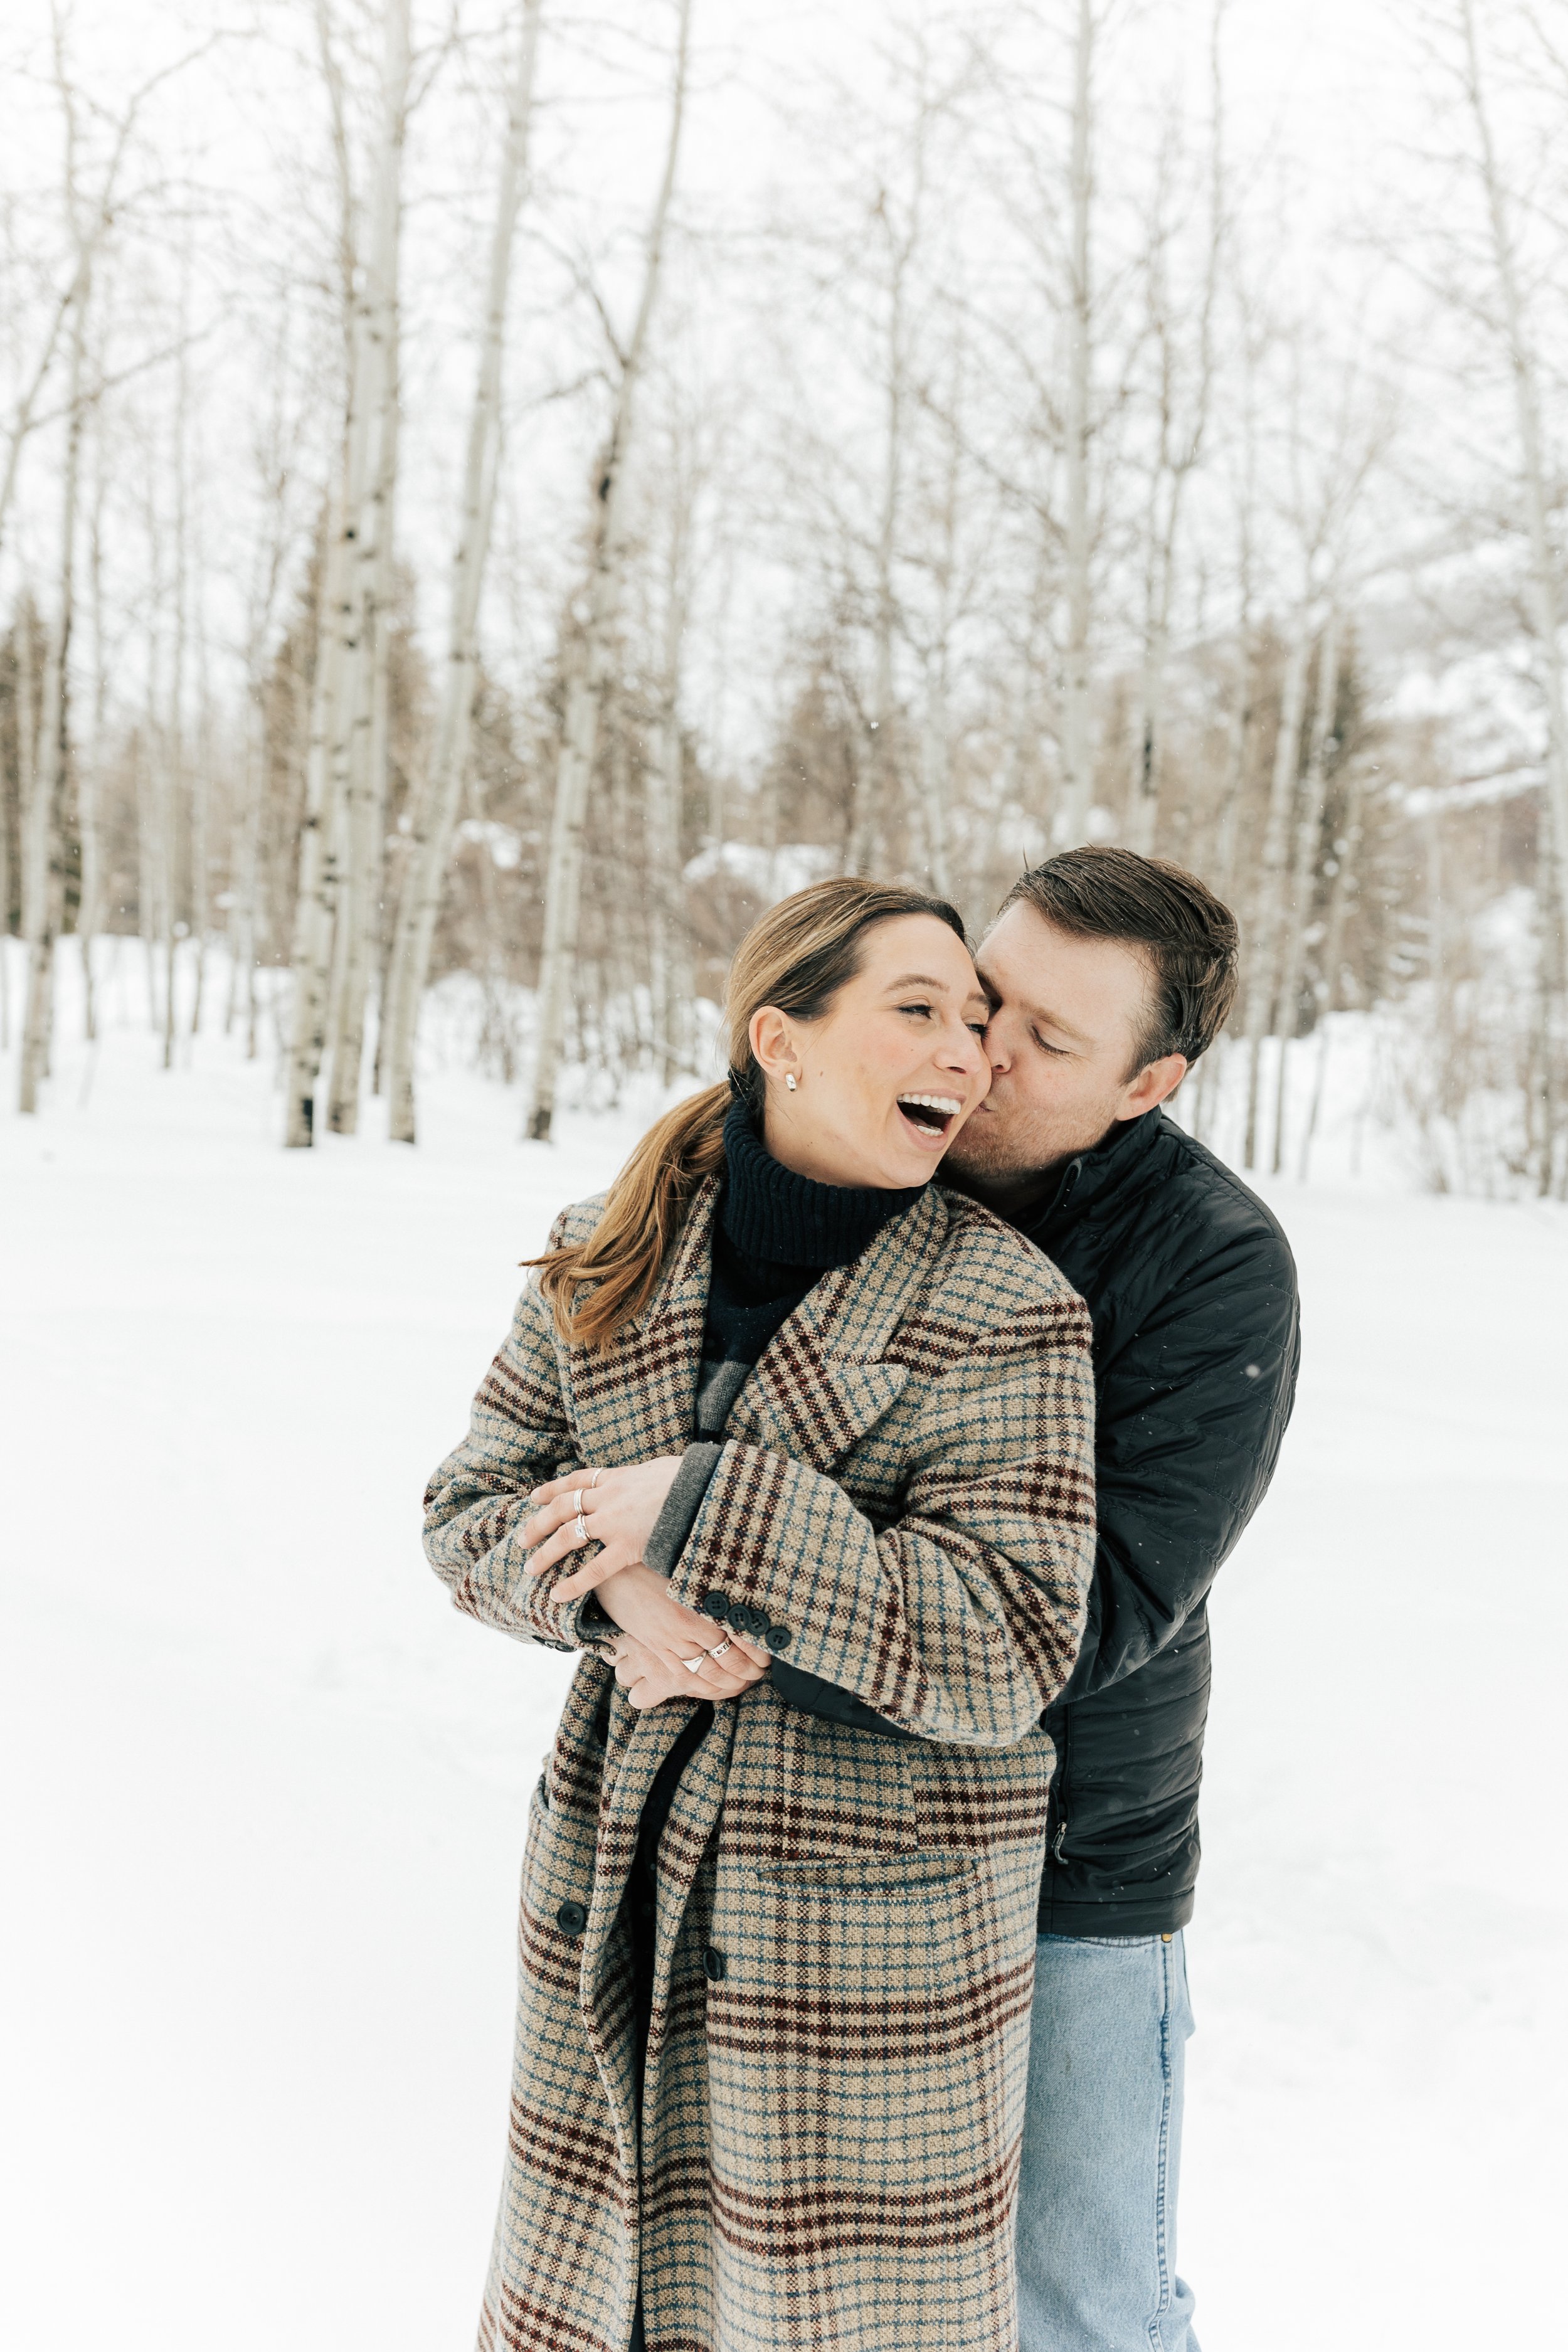  Winter engagement session in Park City, Utah. Boyfriend surprises girlfriend with wedding proposal during a snowy photoshoot. Man proposes to girlfriend. #parkcity #engagements #engagementsessionn #proposal 